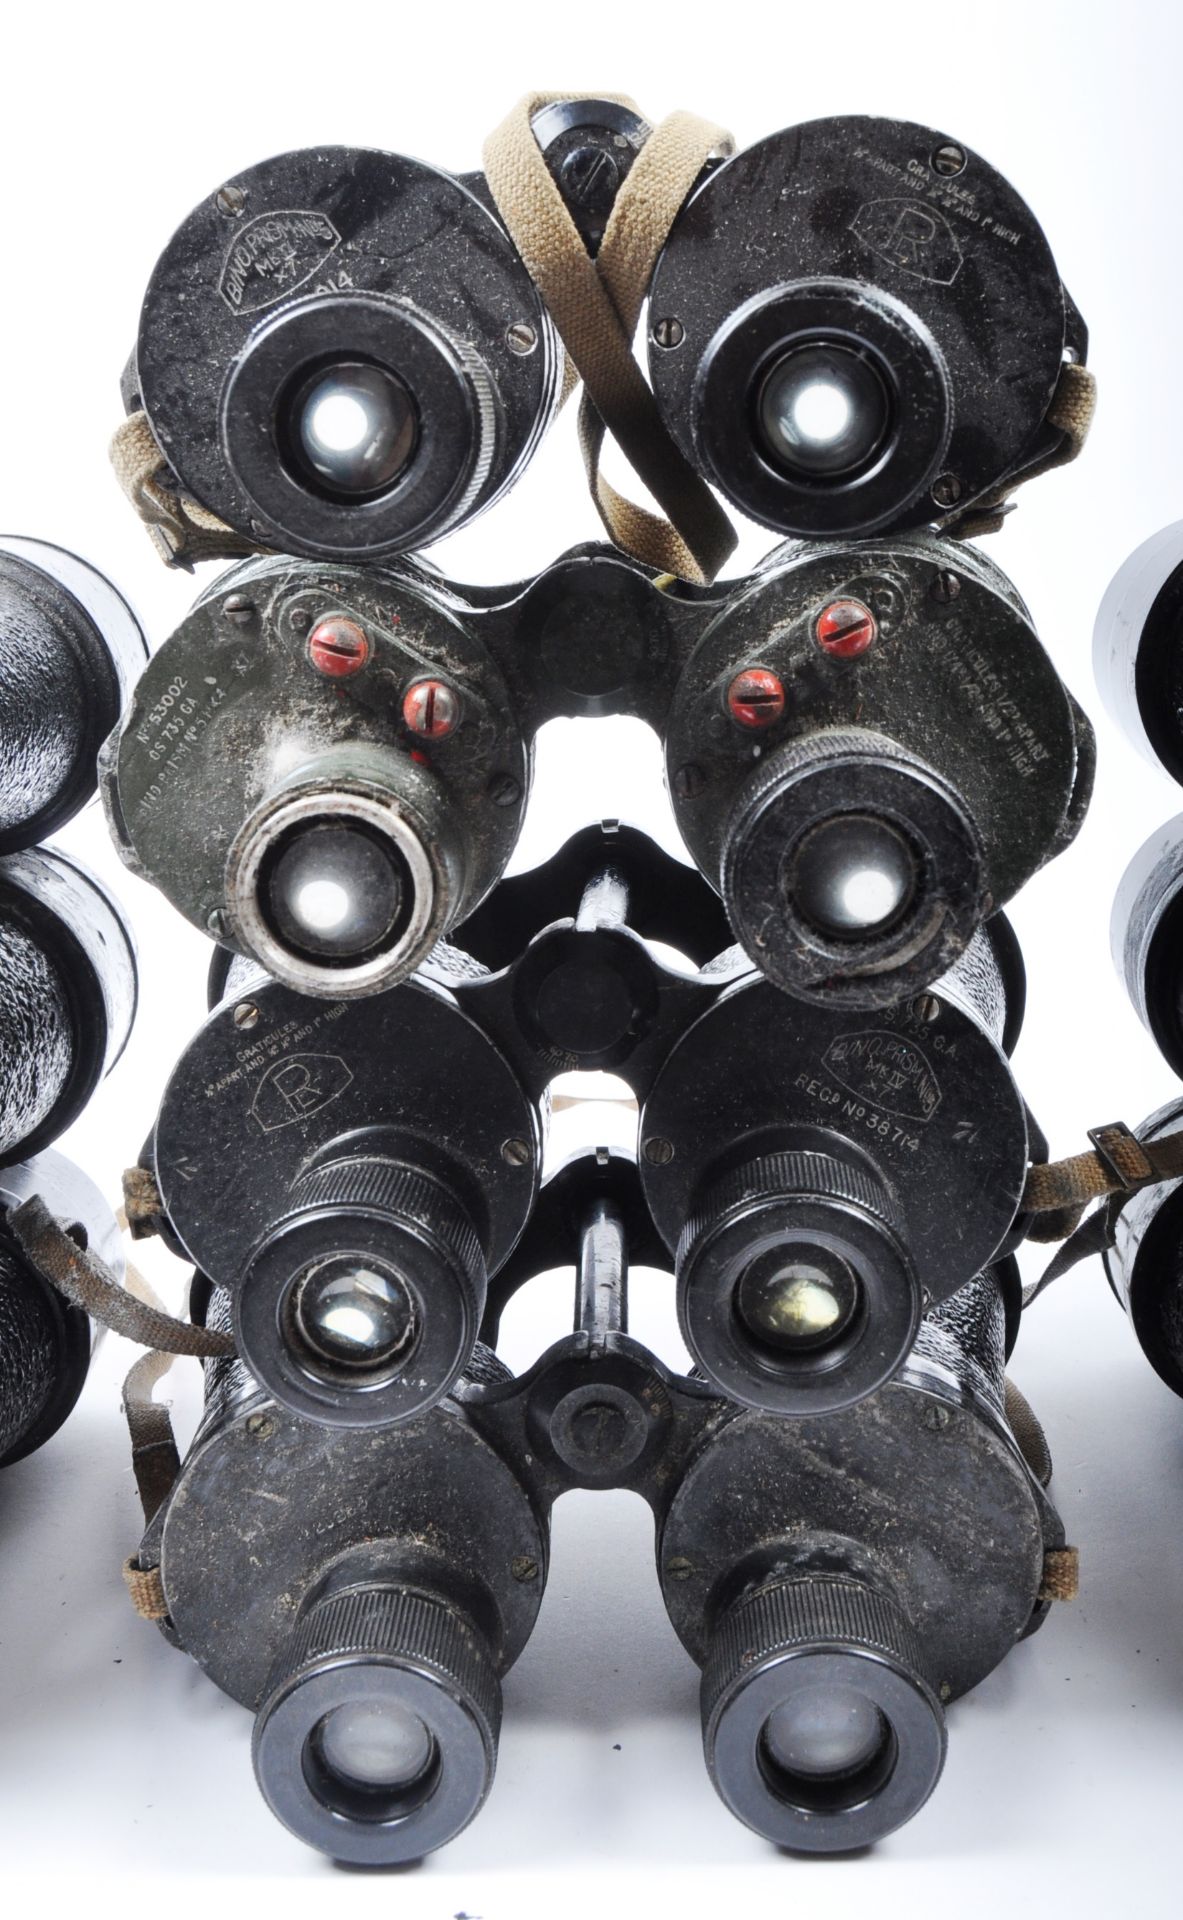 COLLECTION OF VINTAGE ROSS WARTIME BINOCULARS - Image 4 of 5